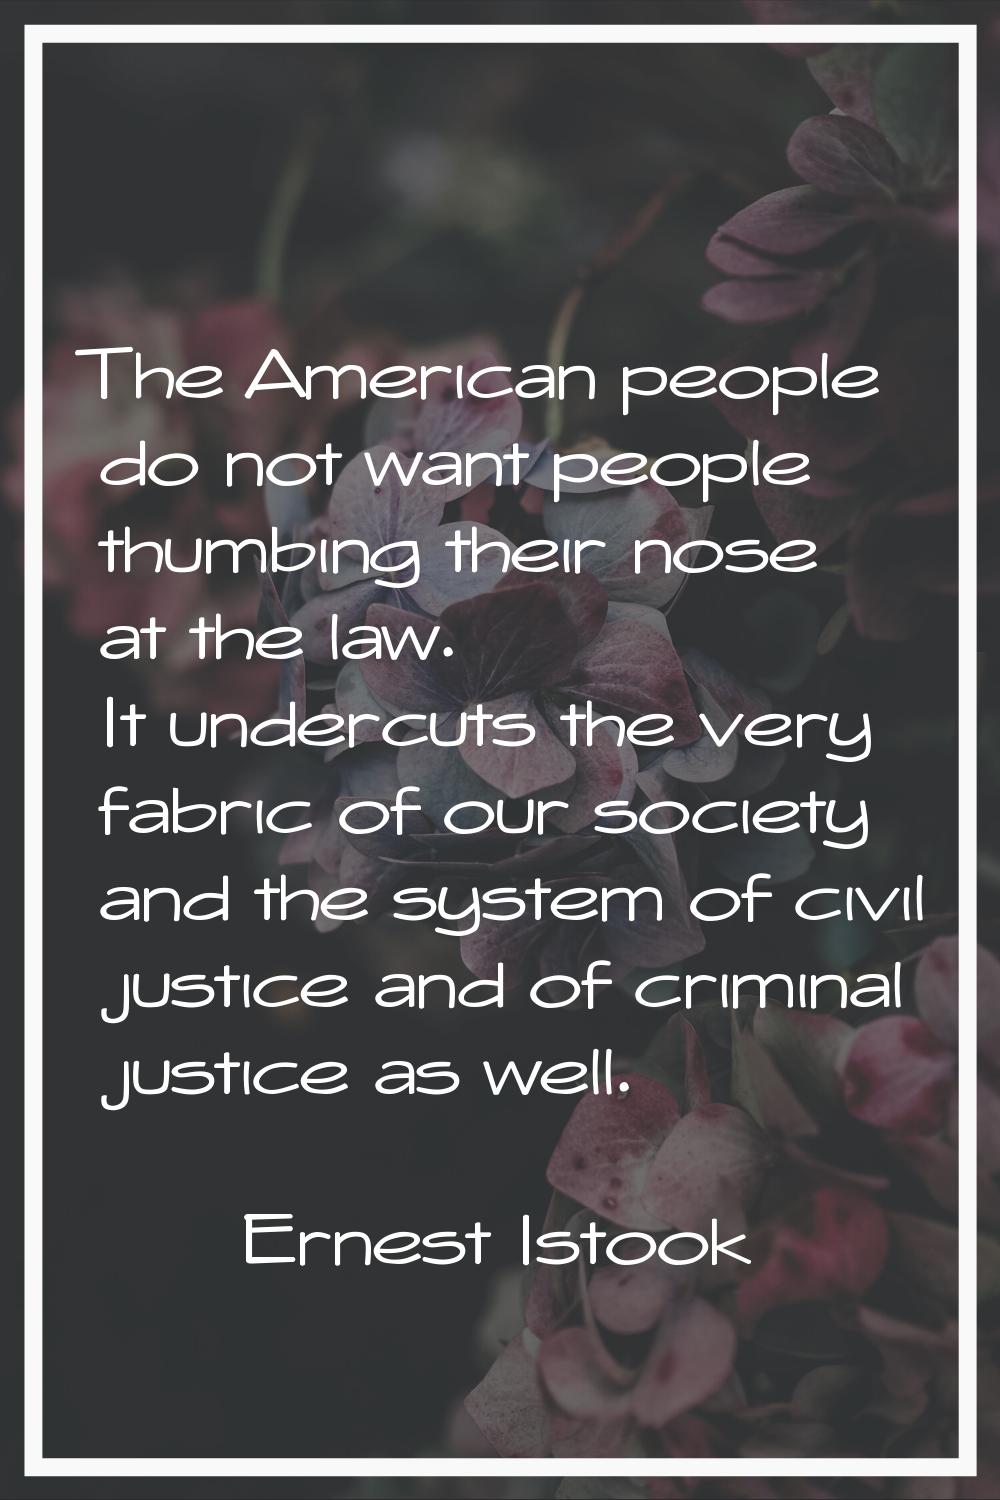 The American people do not want people thumbing their nose at the law. It undercuts the very fabric